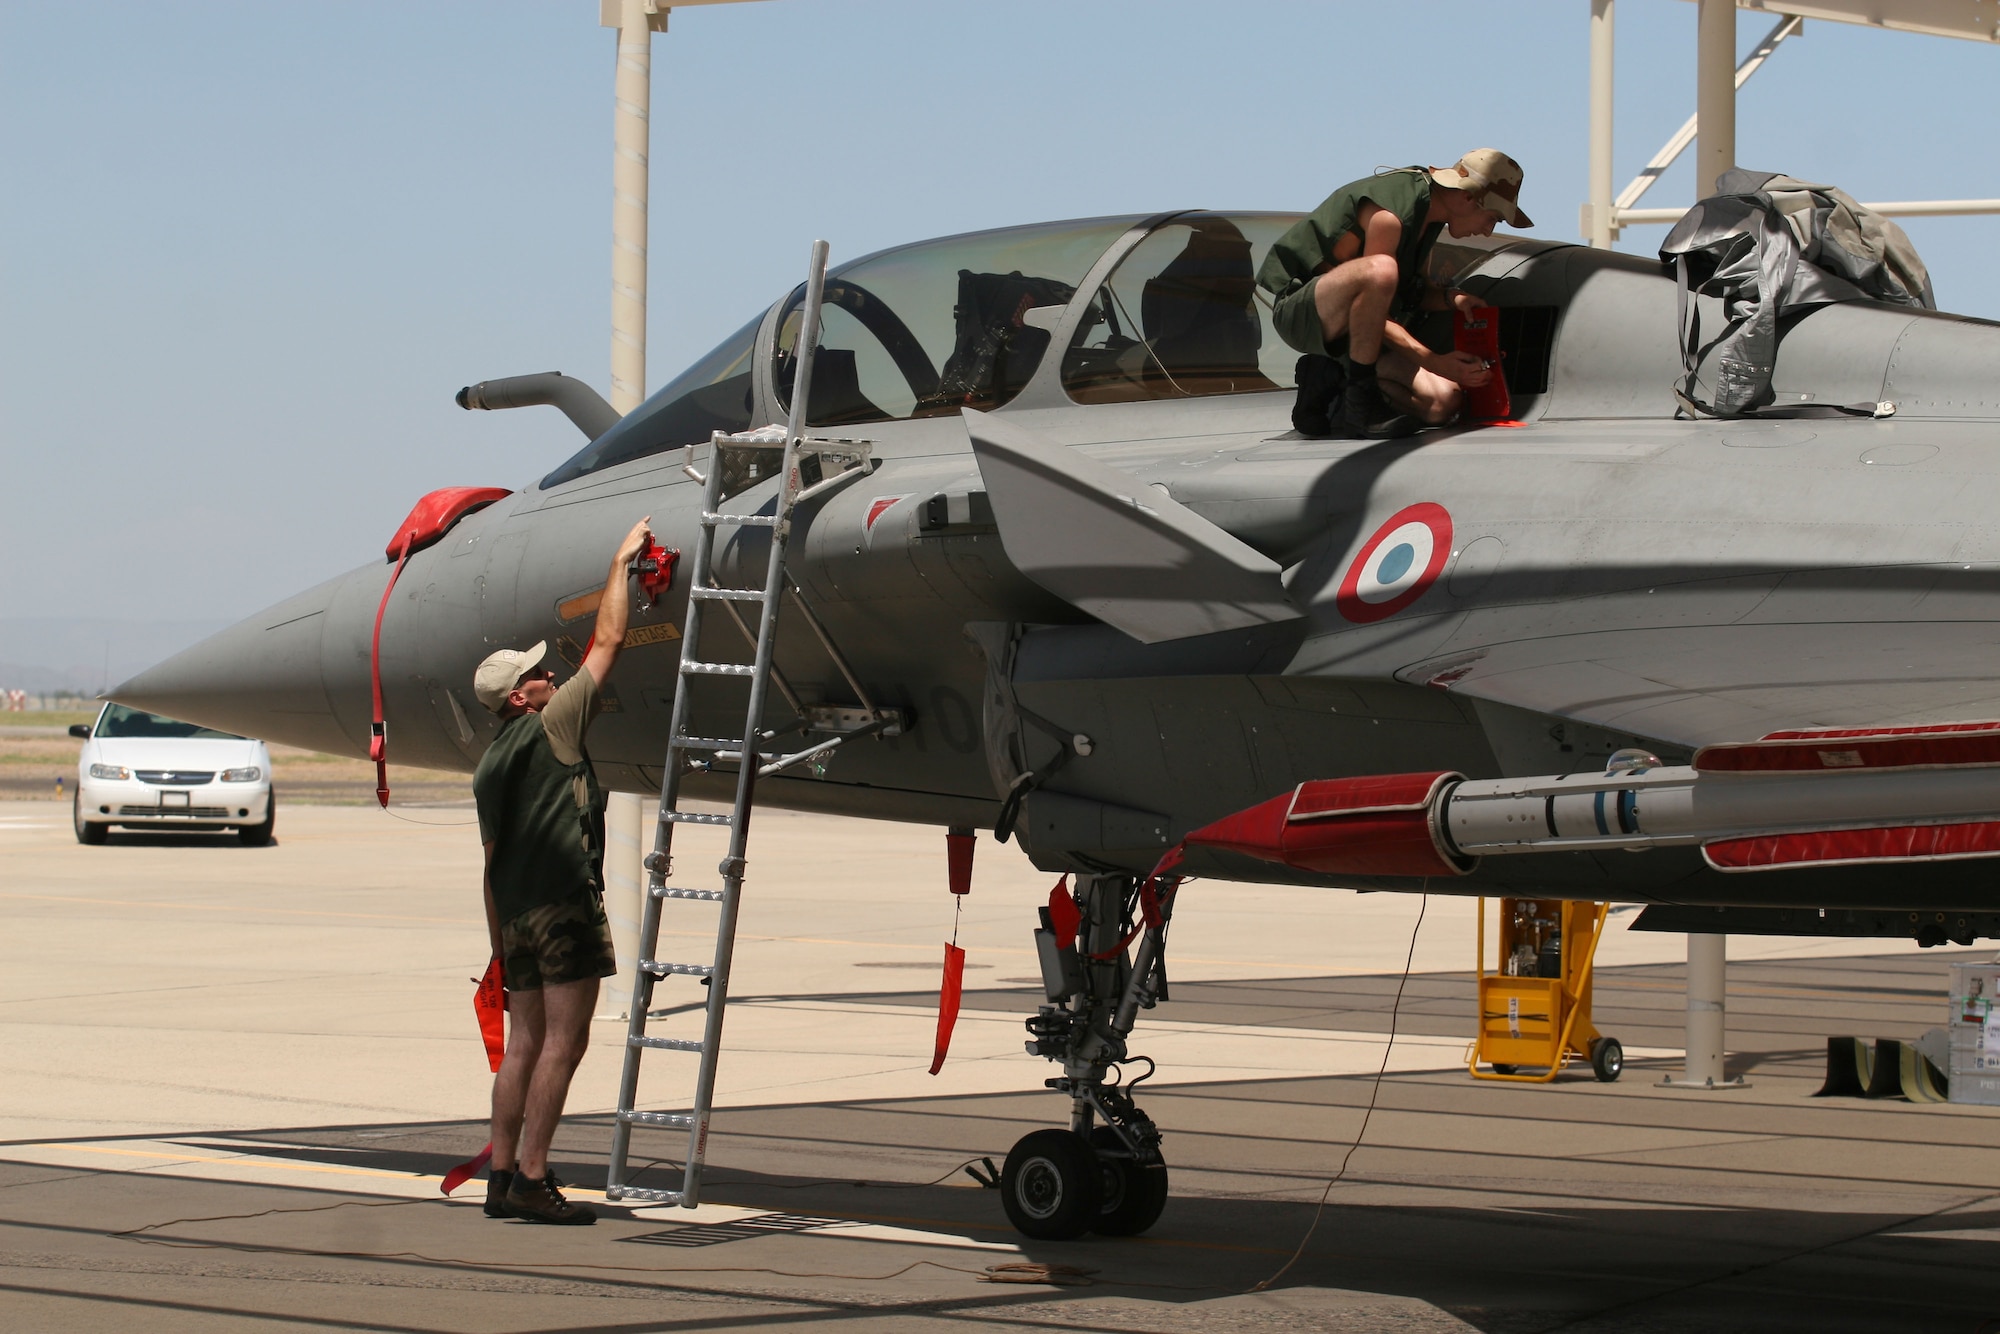 Two French air force maintainers work on their Rafale aircraft during visit to Luke AFB, July 29. Four aircraft and more than 100 personnel deployed for the first time on U.S. soil to participate in a joint exercise at Luke. (Photo courtesy of Pete Pallagi/Daily News-Sun)